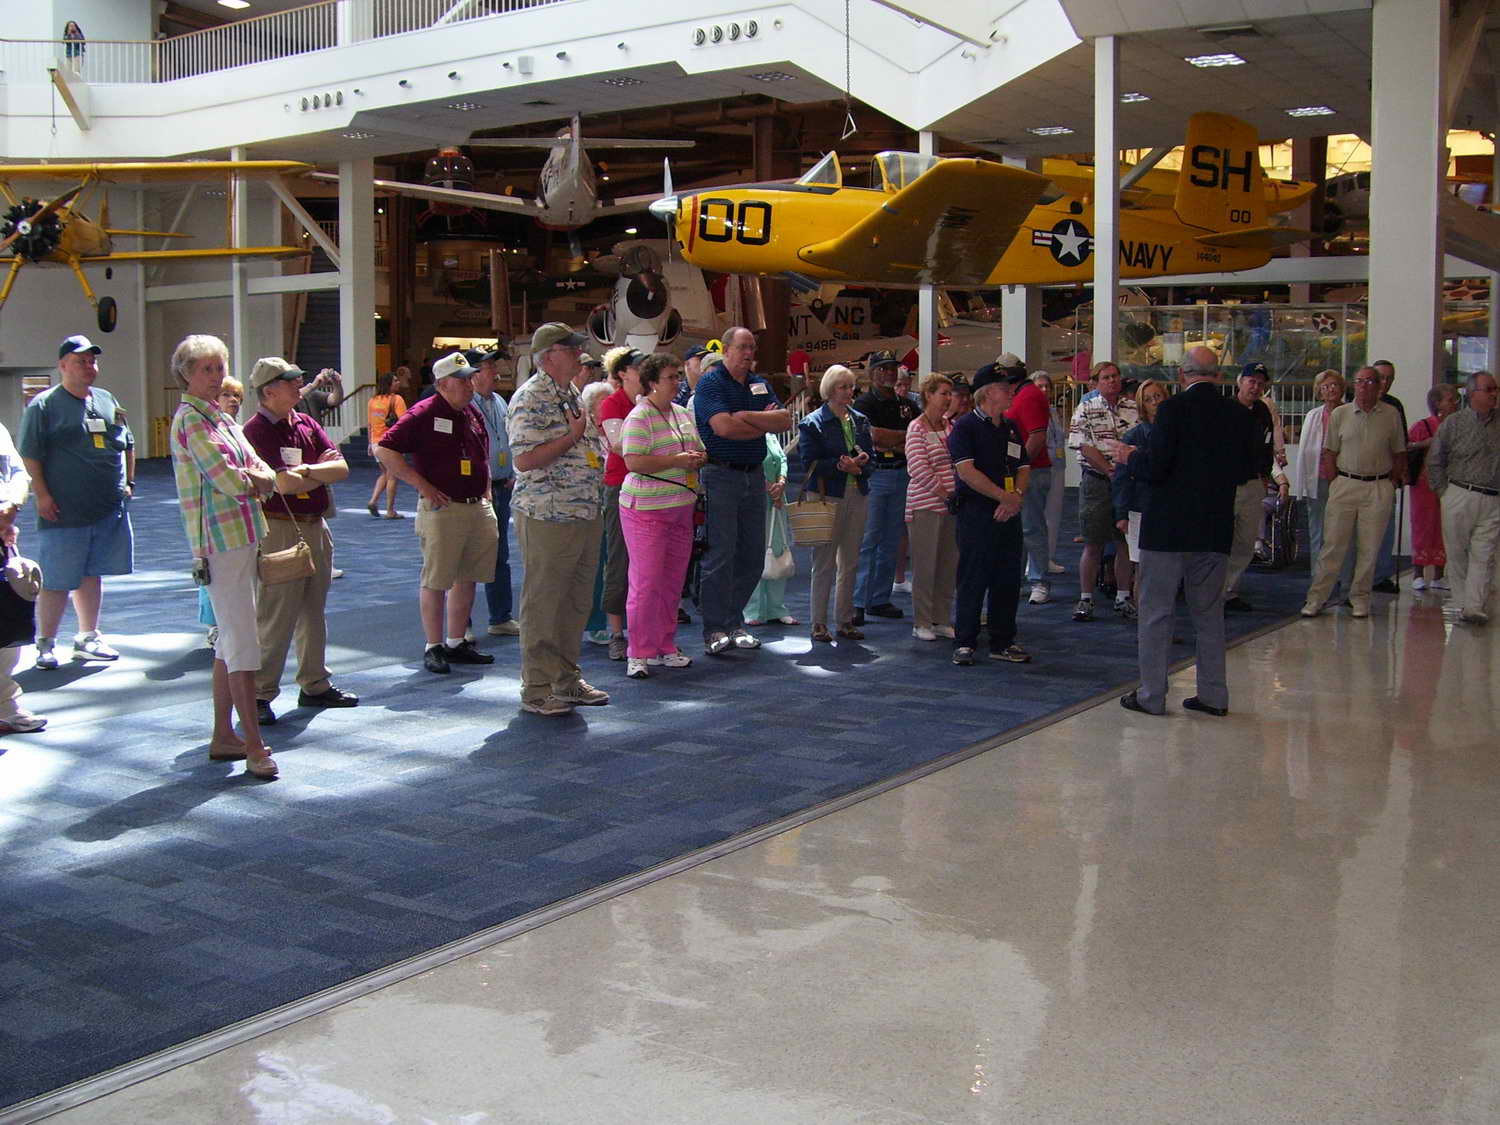 Touring the National Naval Aviation Museum